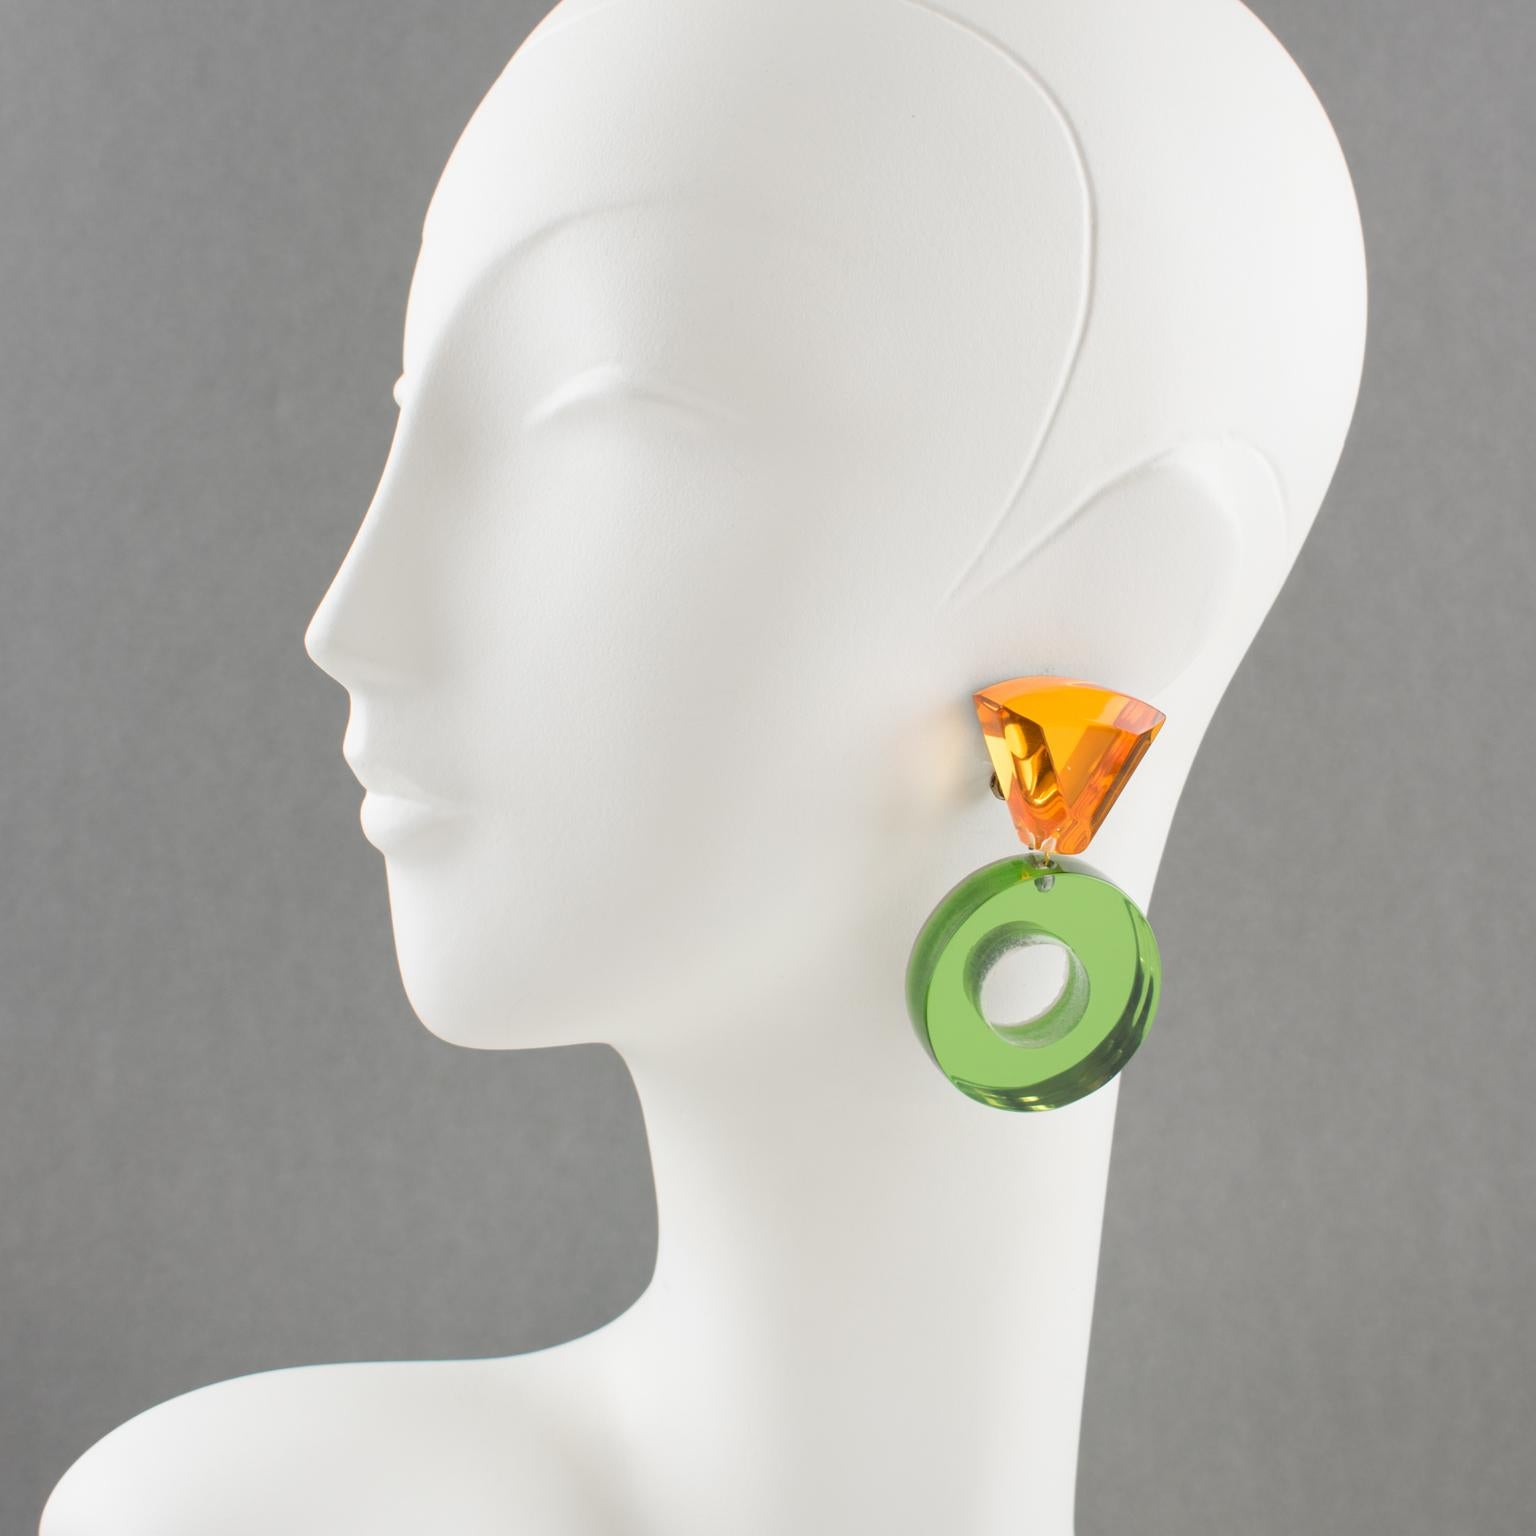 Harriet Bauknigt designed those stylish Lucite clip-on earrings for Kaso in the 1980s. The pieces boast a massive donut dangling shape with a geometric design. The mirrored textured pattern is in olive green and bright orange colors. The Kaso paper